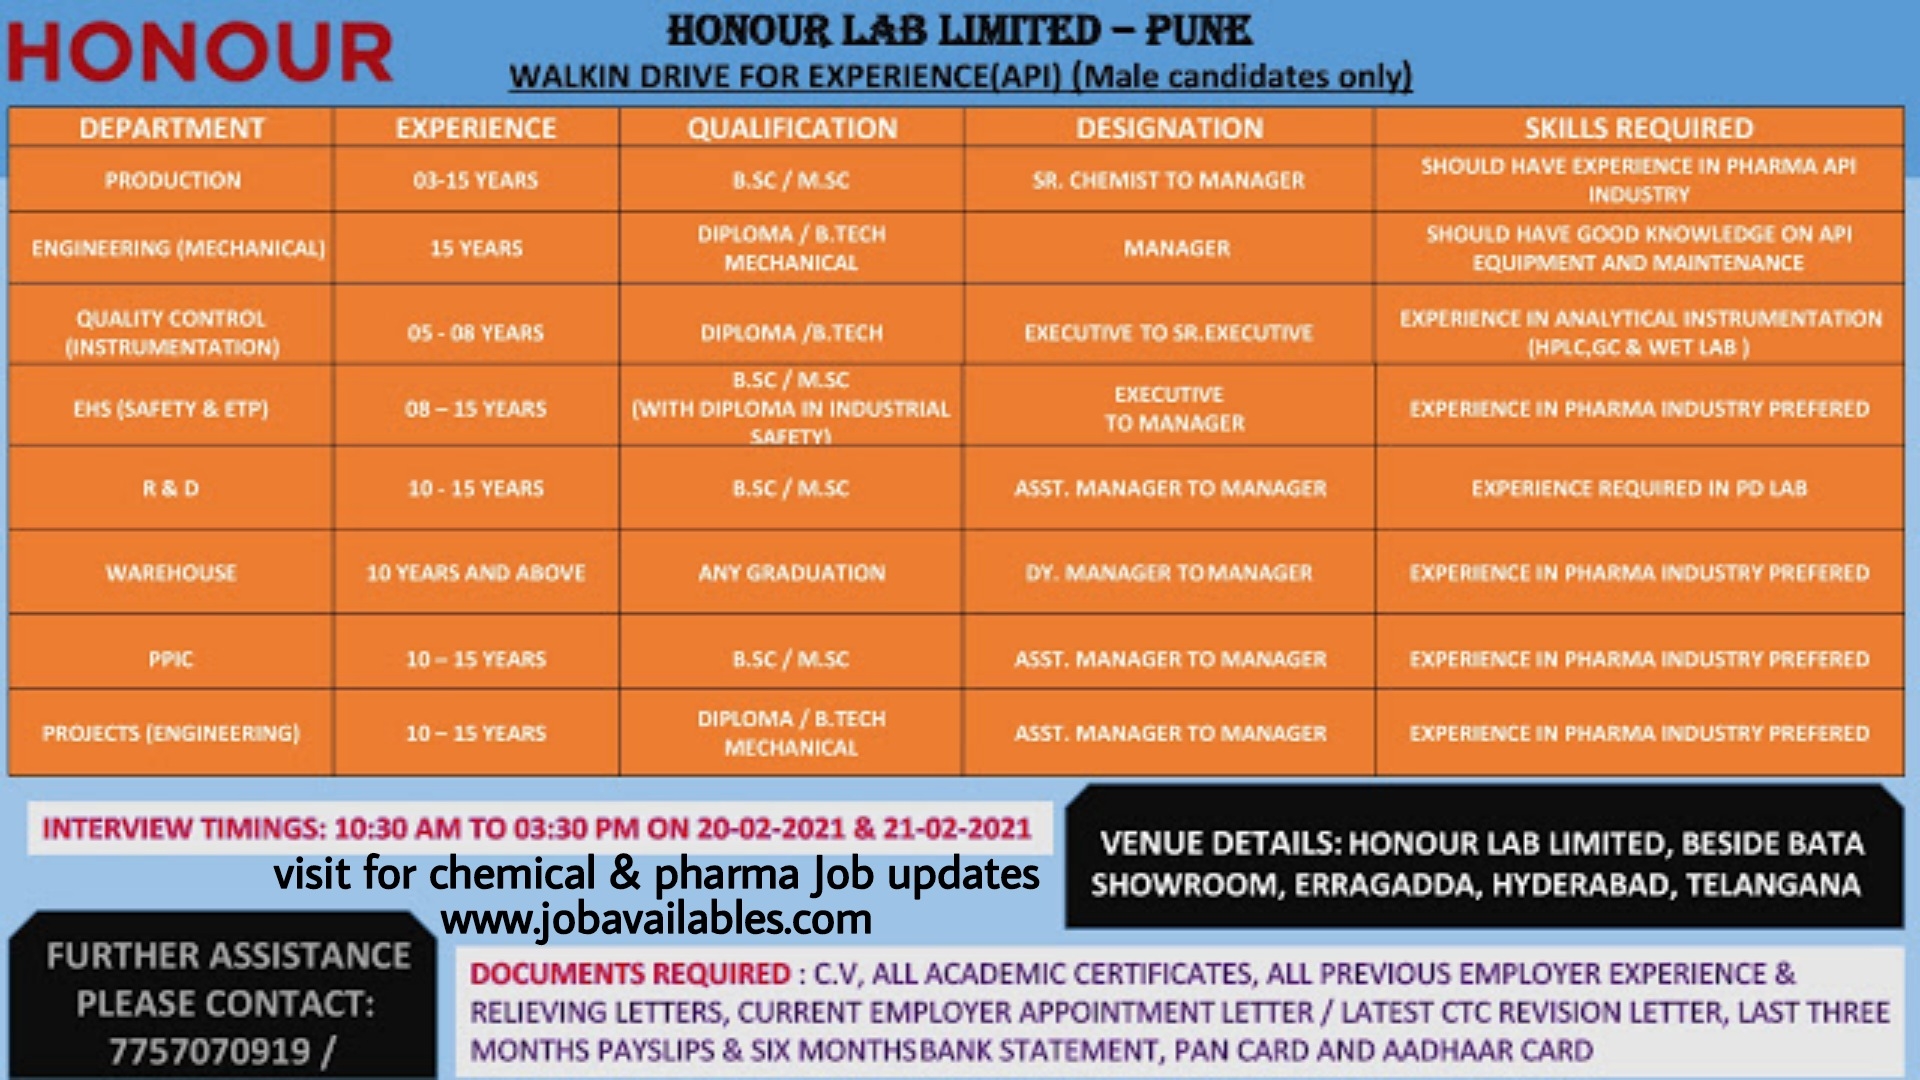 Job Availables, Honor lab Ltd Interview For QC/ PPIC/ EHS/ R&D/ Warehouse/ Production/ Mechanical Engineering Dept